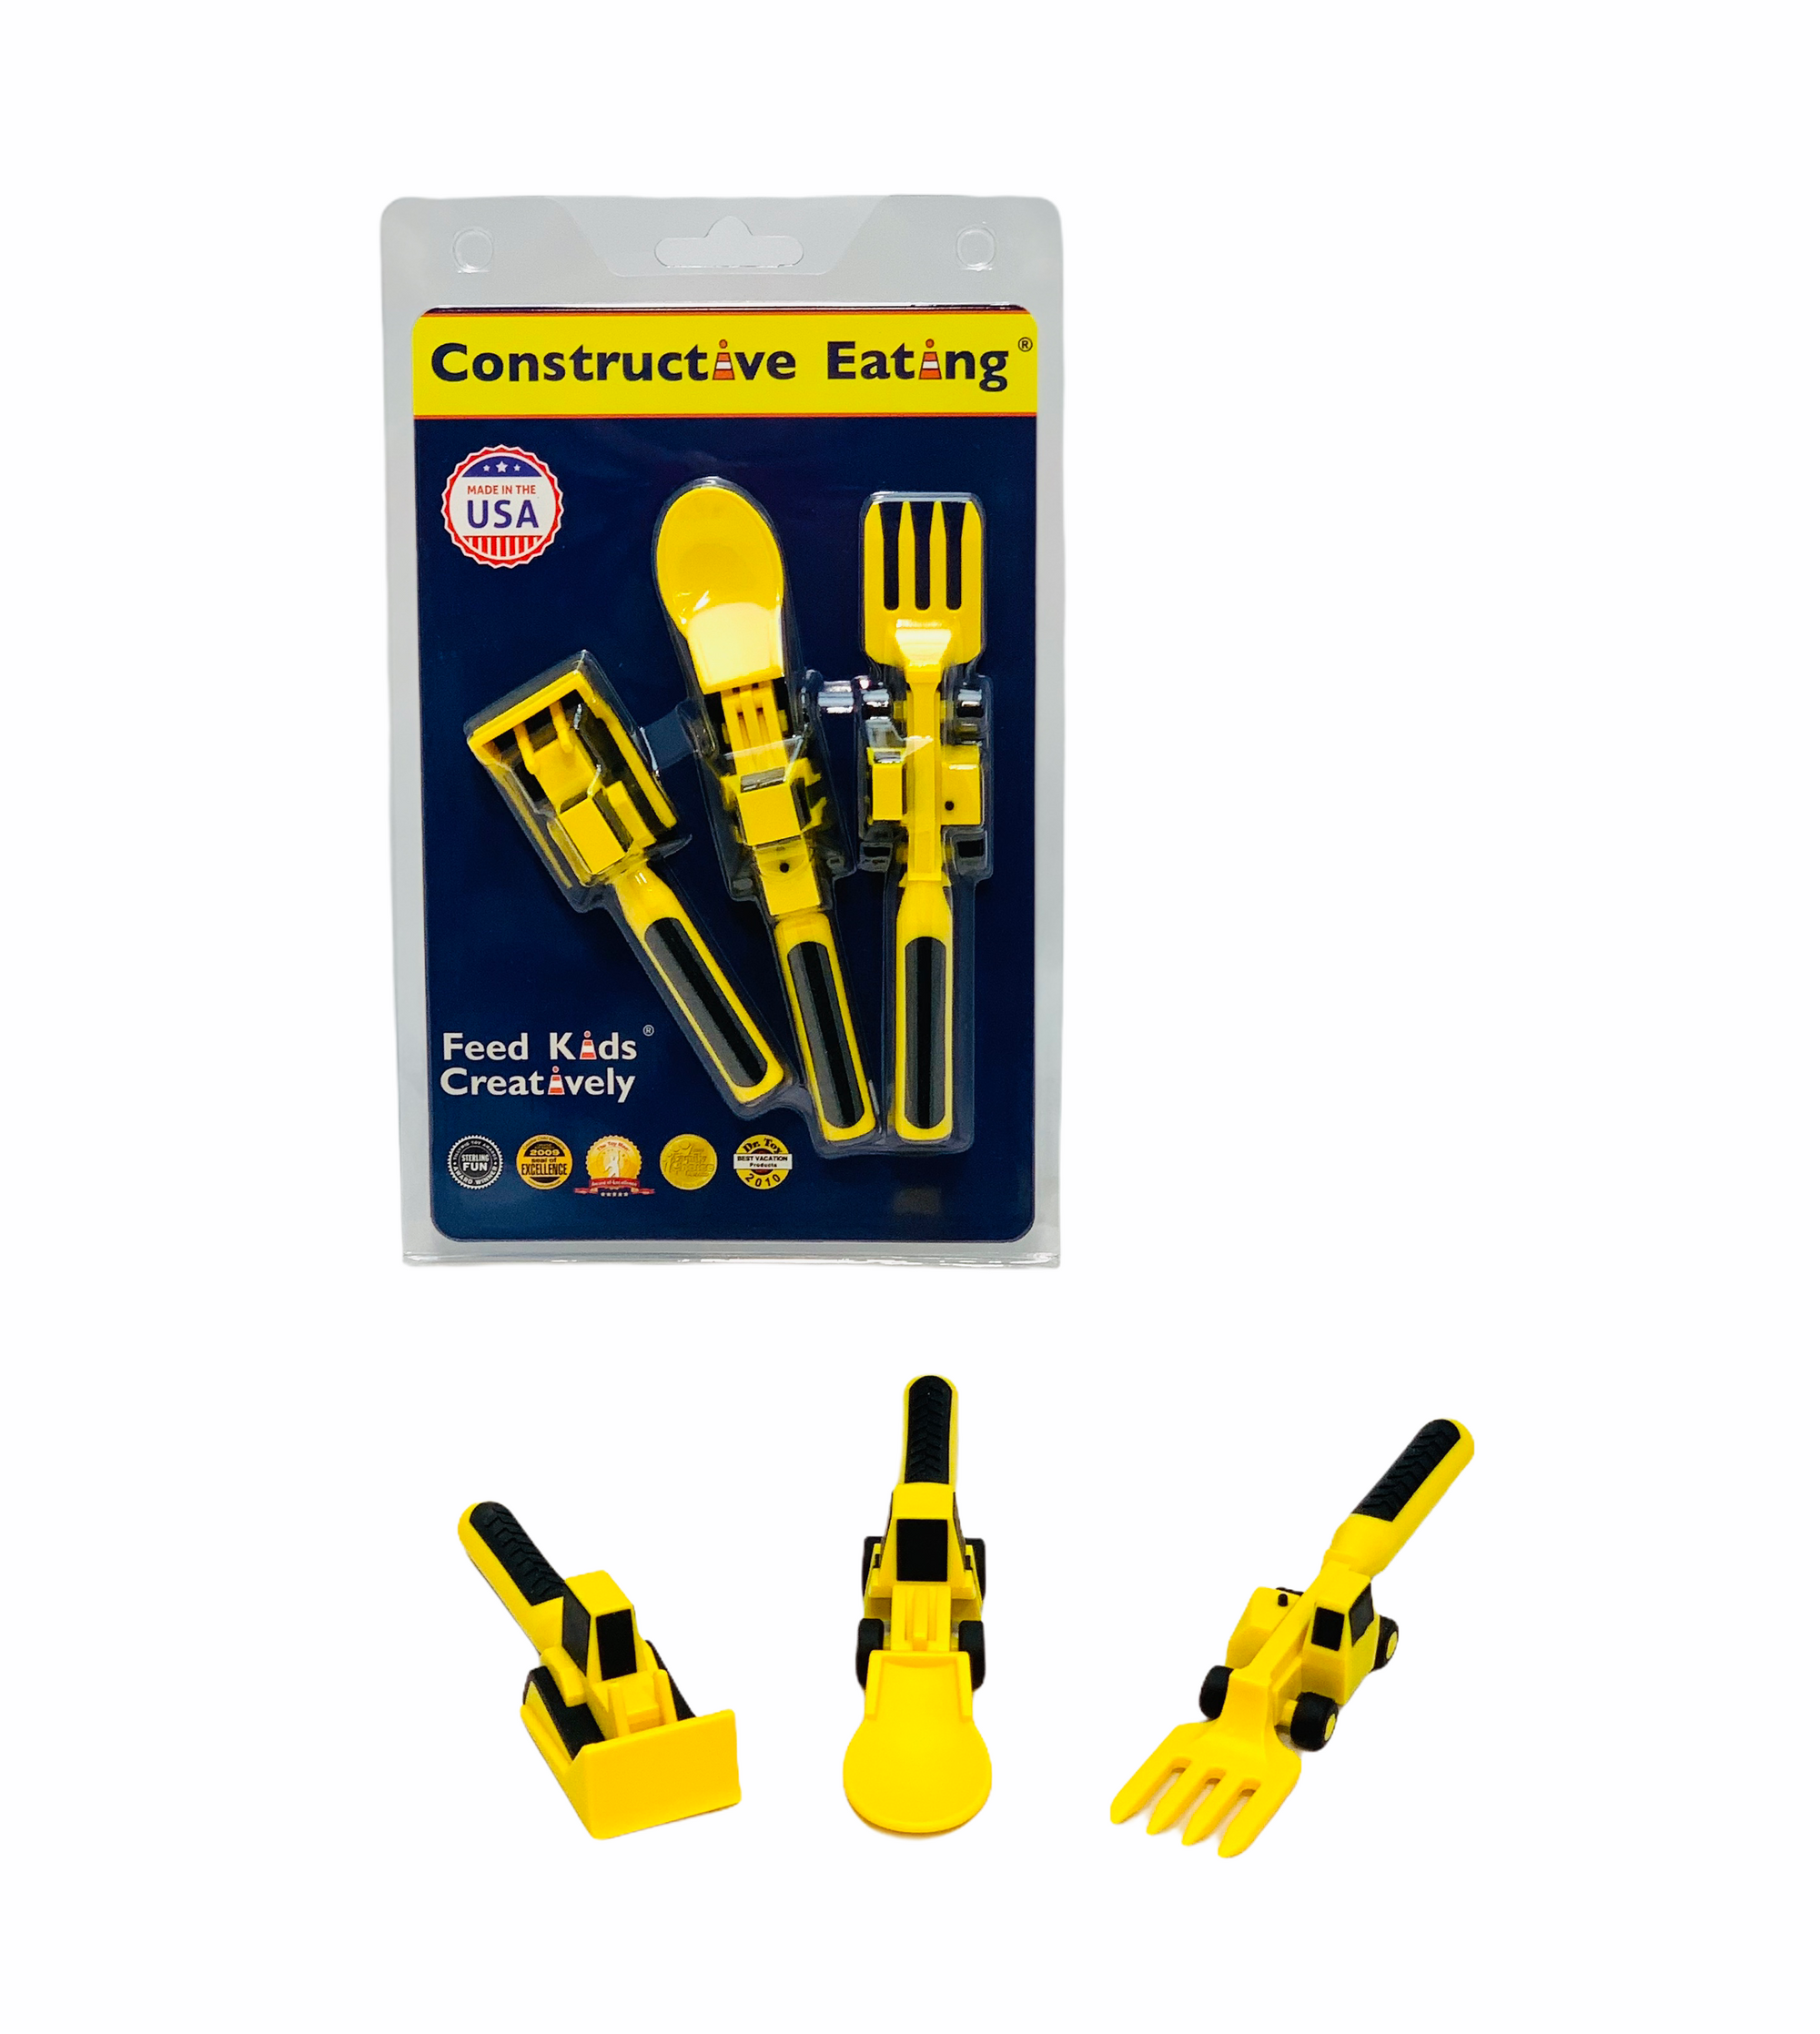 Constructive Eating Cutlery - Construction set with knife form and spoon in front of packaging